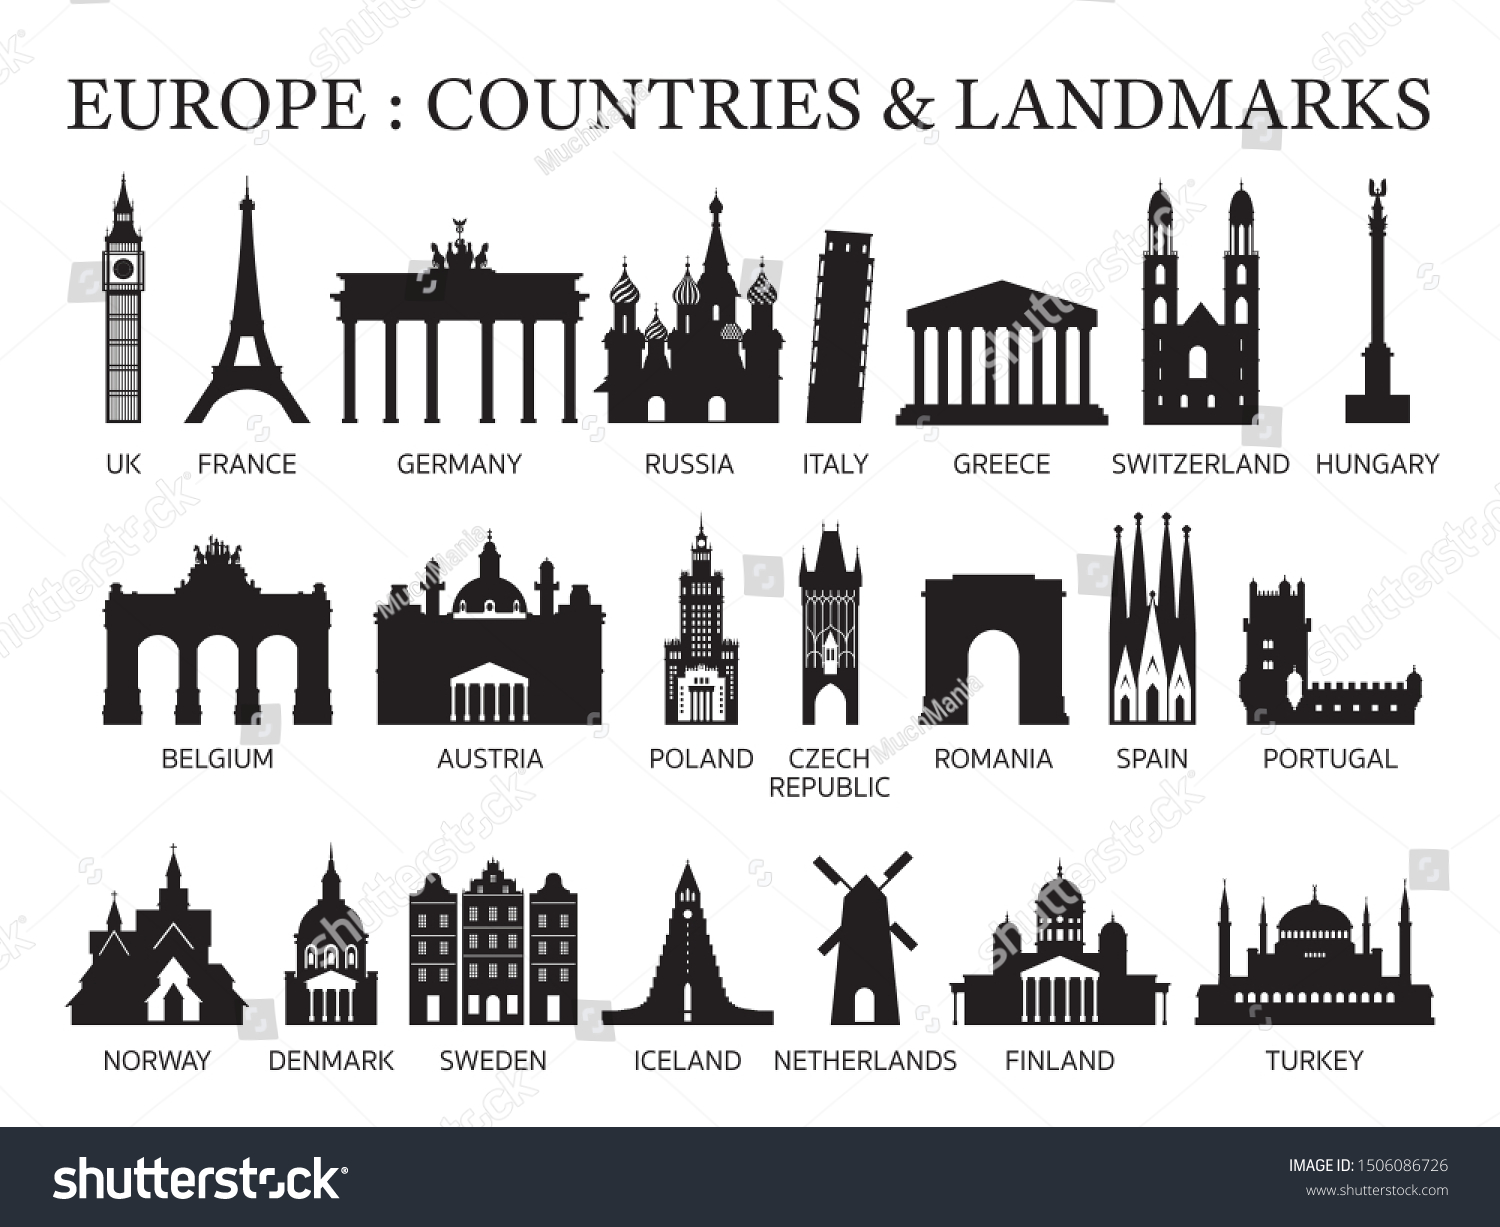 Europe Countries Landmarks Silhouette, Famous Place and Historical Buildings, Travel and Tourist Attraction